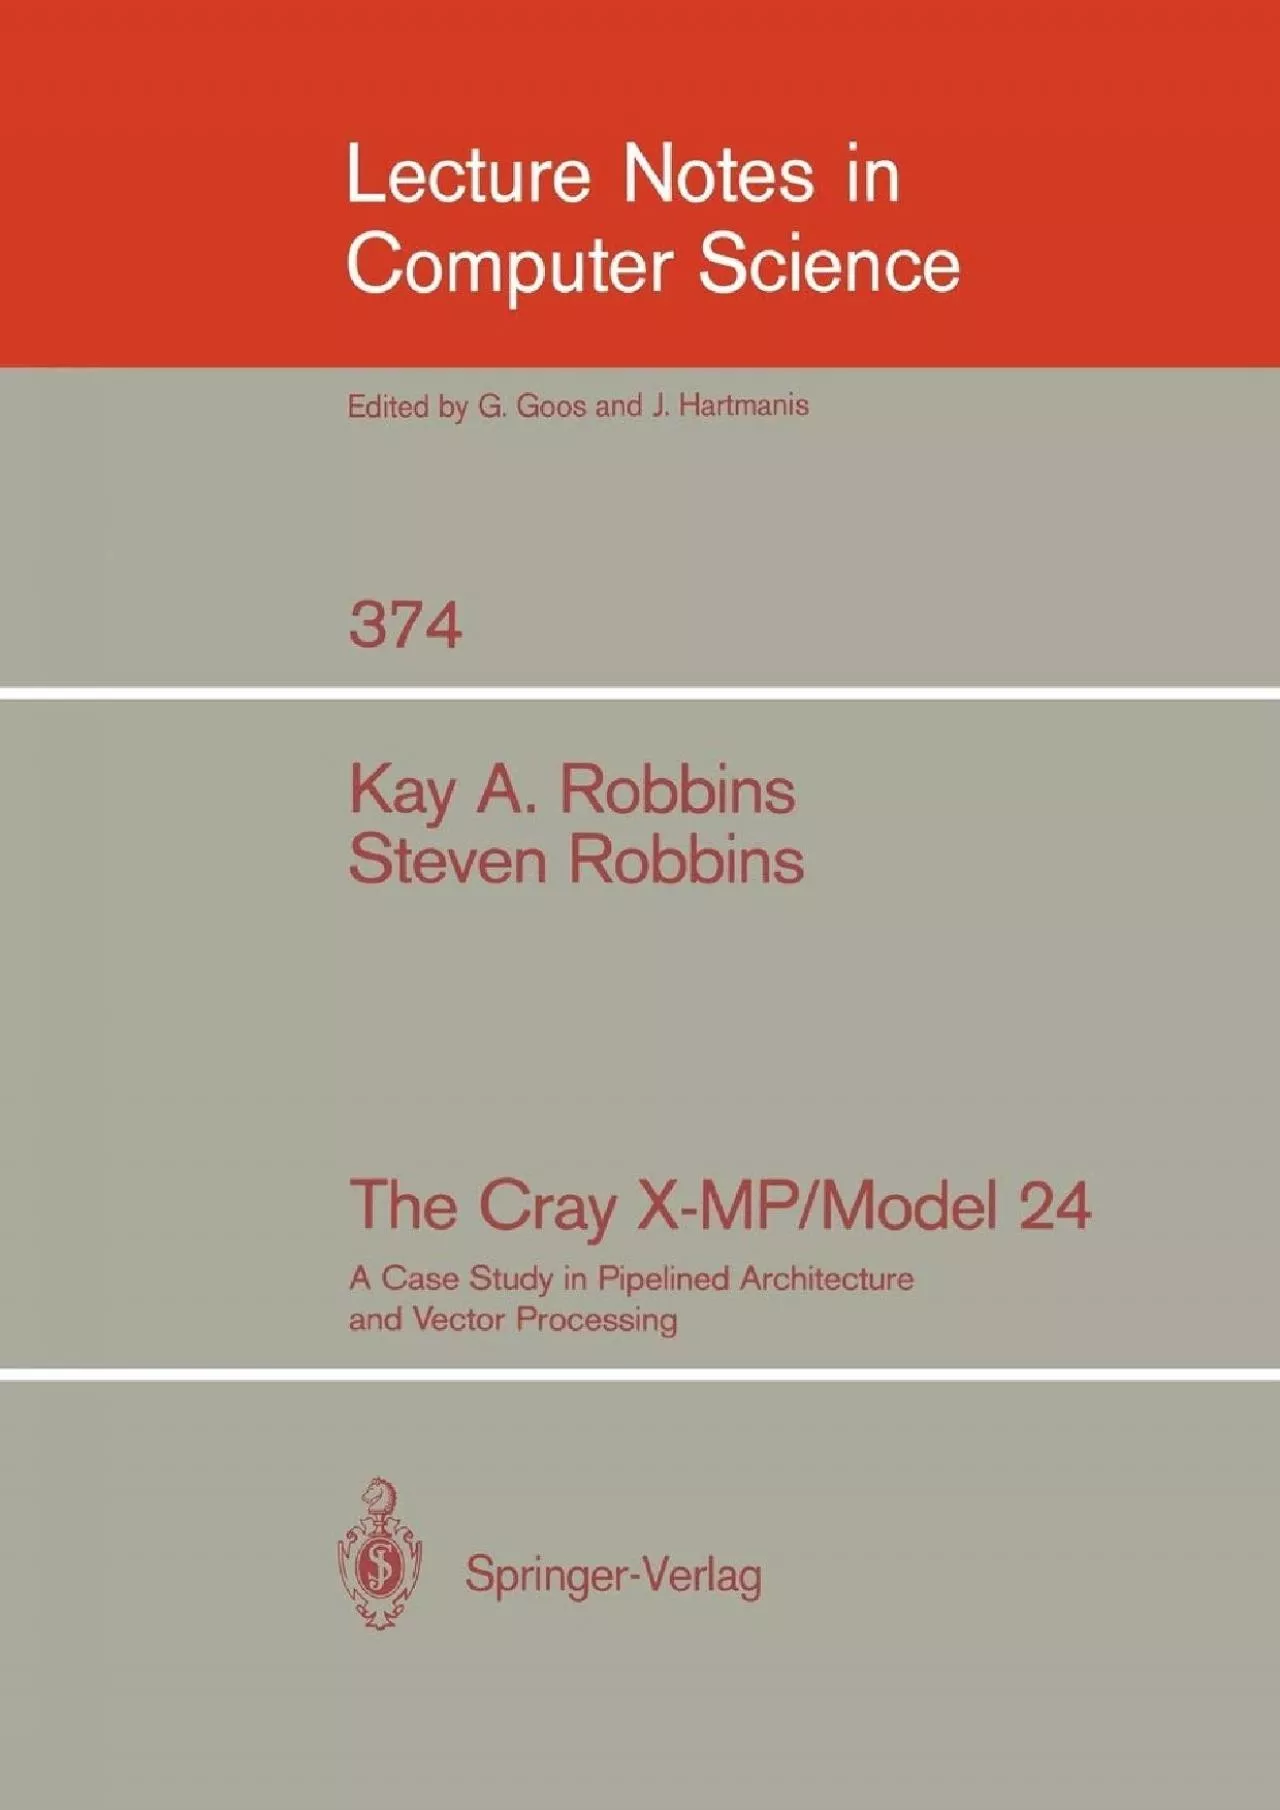 [READING BOOK]-The Cray X-MP/Model 24: A Case Study in Pipelined Architecture and Vector